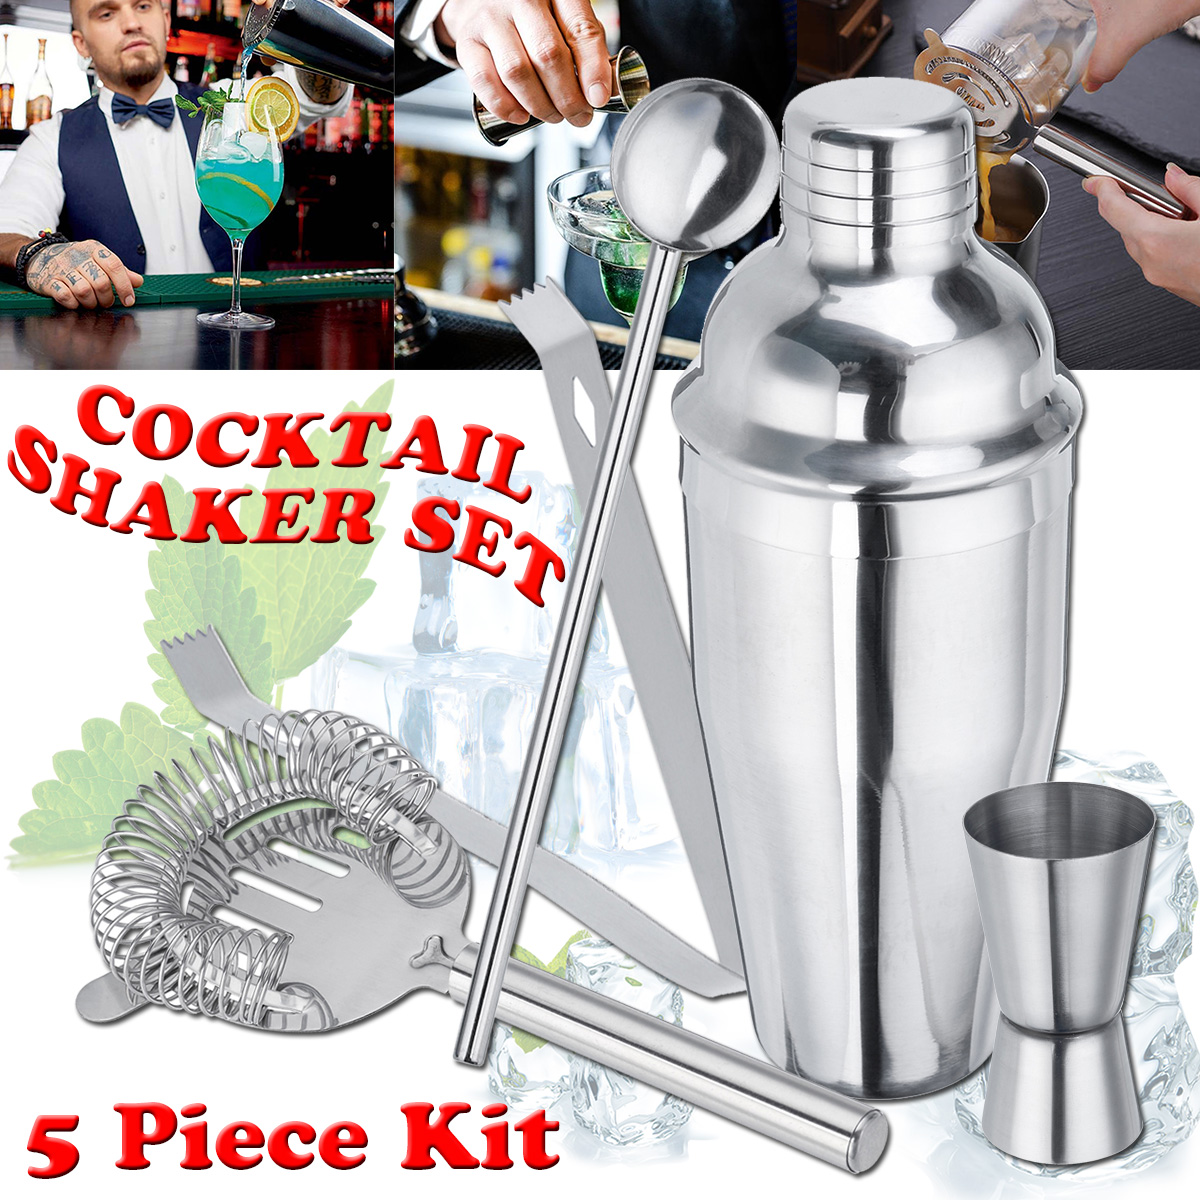 5Pcs Stainless Steel Cocktail Drink Bartender Shaker Mixer Bar Mixing Kit Tools 